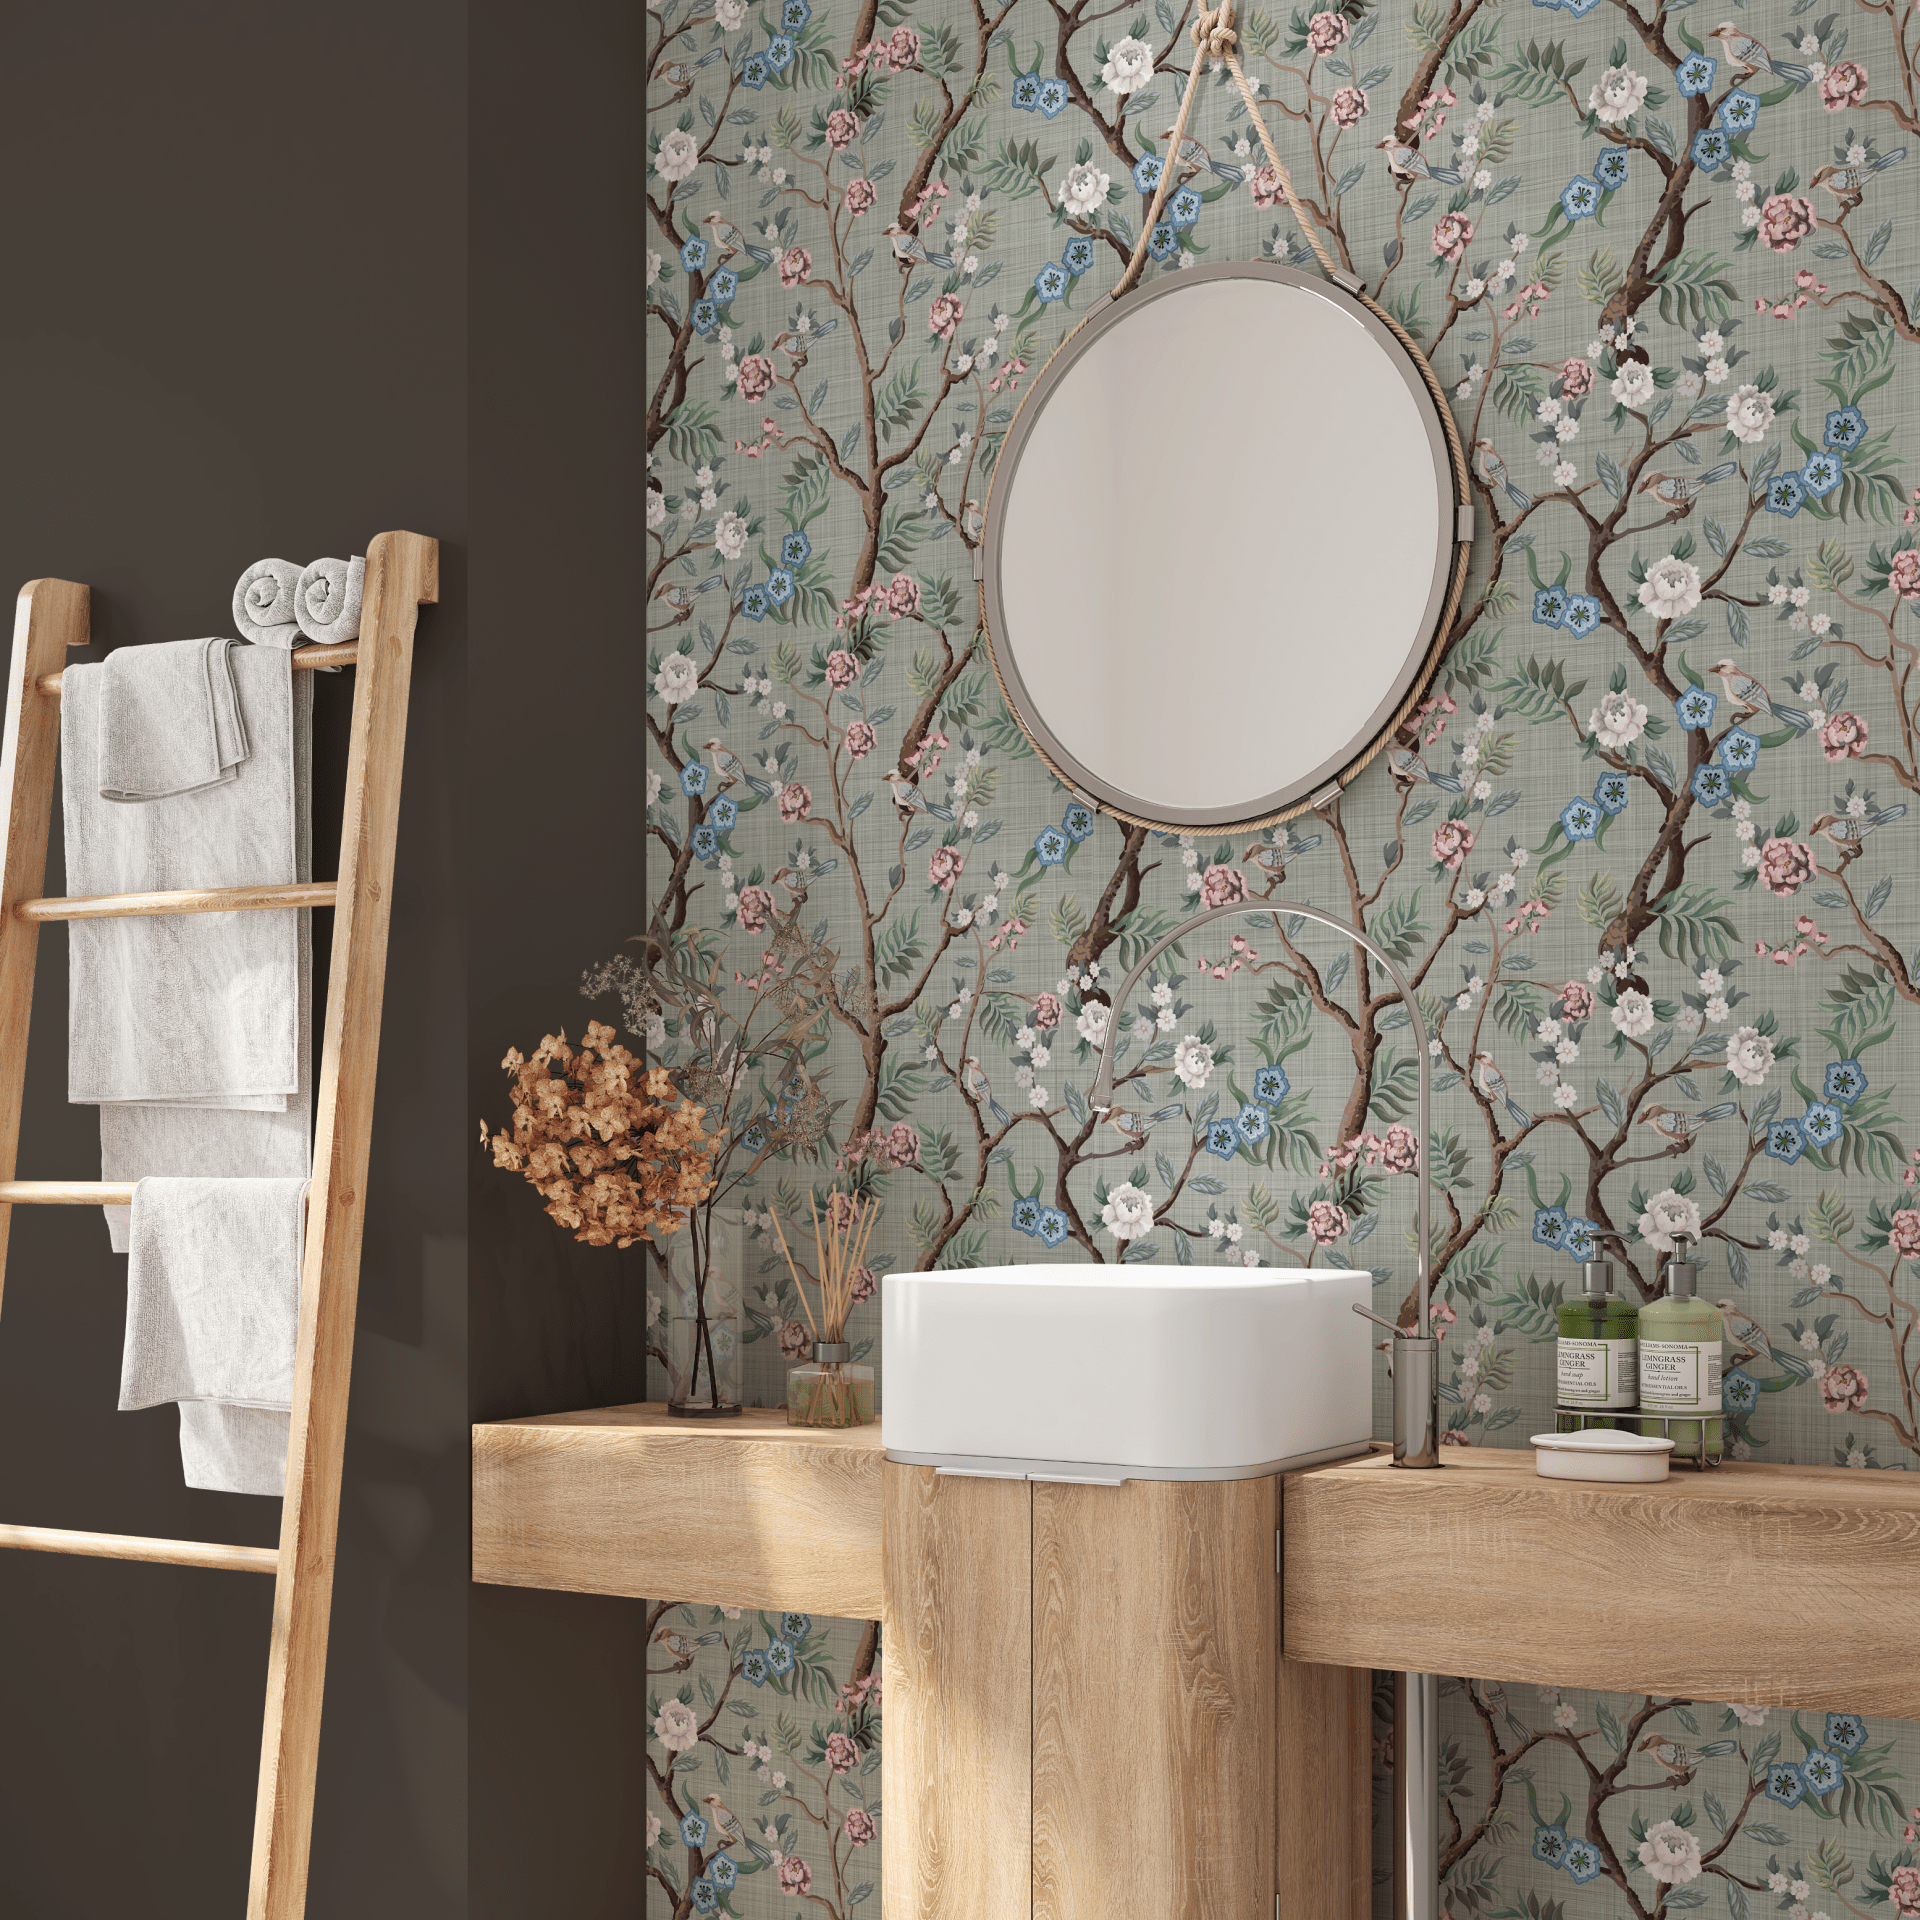 Elegant bathroom featuring peel and stick wallpaper with a classic Chinoiserie design of blossoming branches on a greenish-gray background